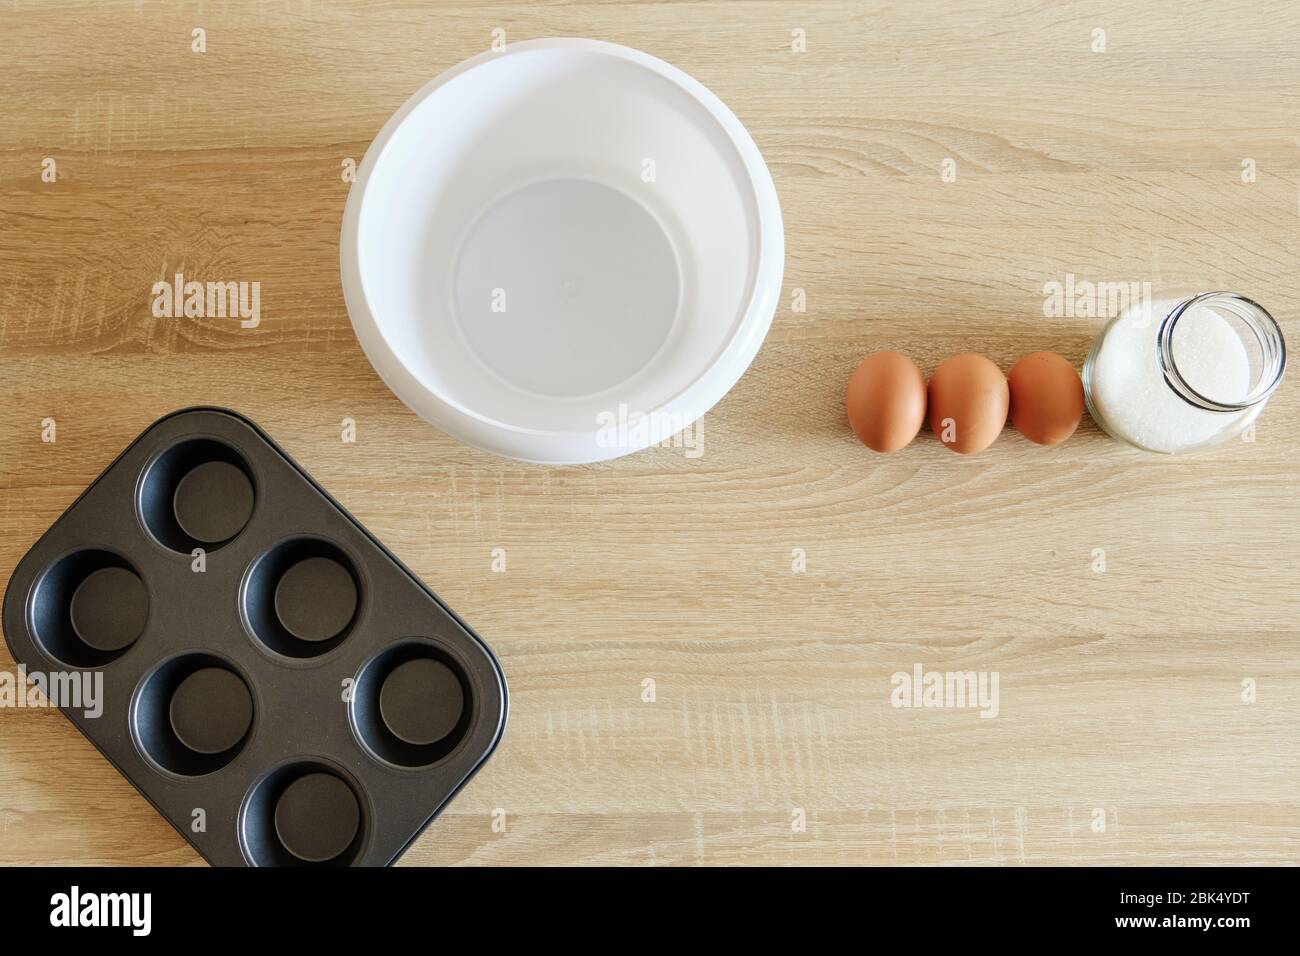 cookware with baking ingredients plates and shapes waiting to cooked Stock Photo